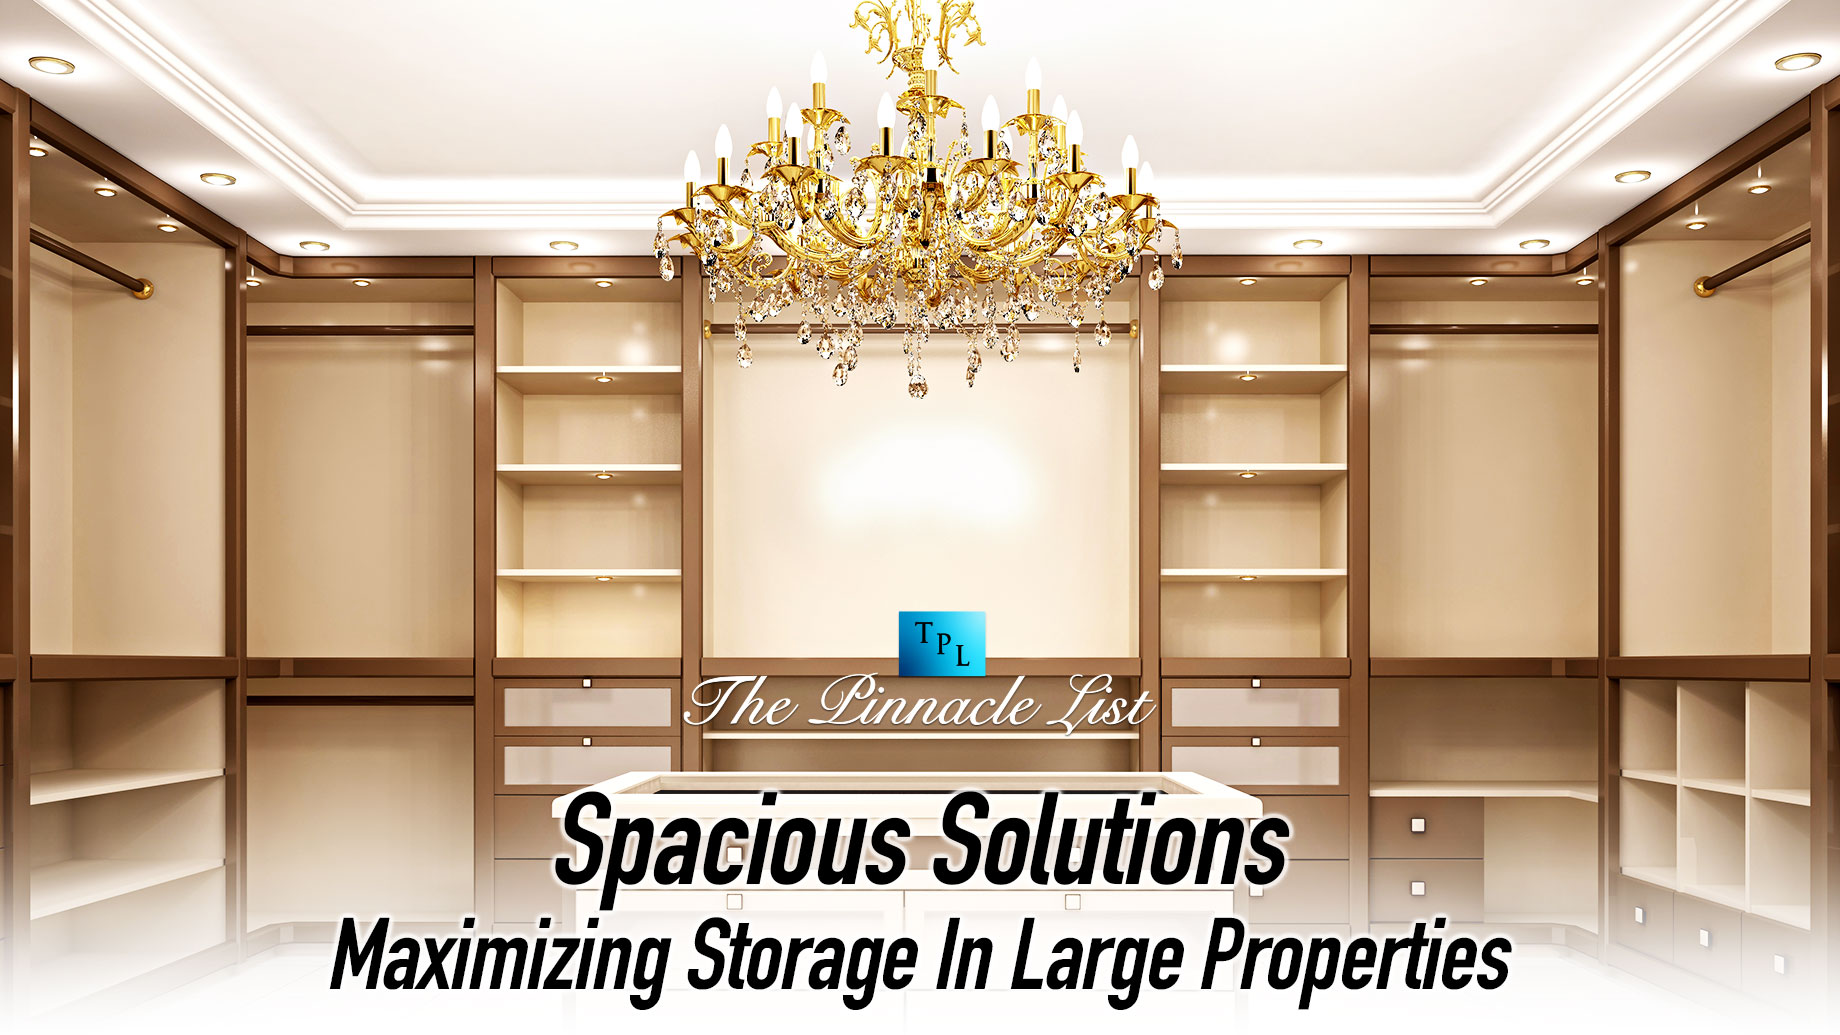 Spacious Solutions: Maximizing Storage In Large Properties